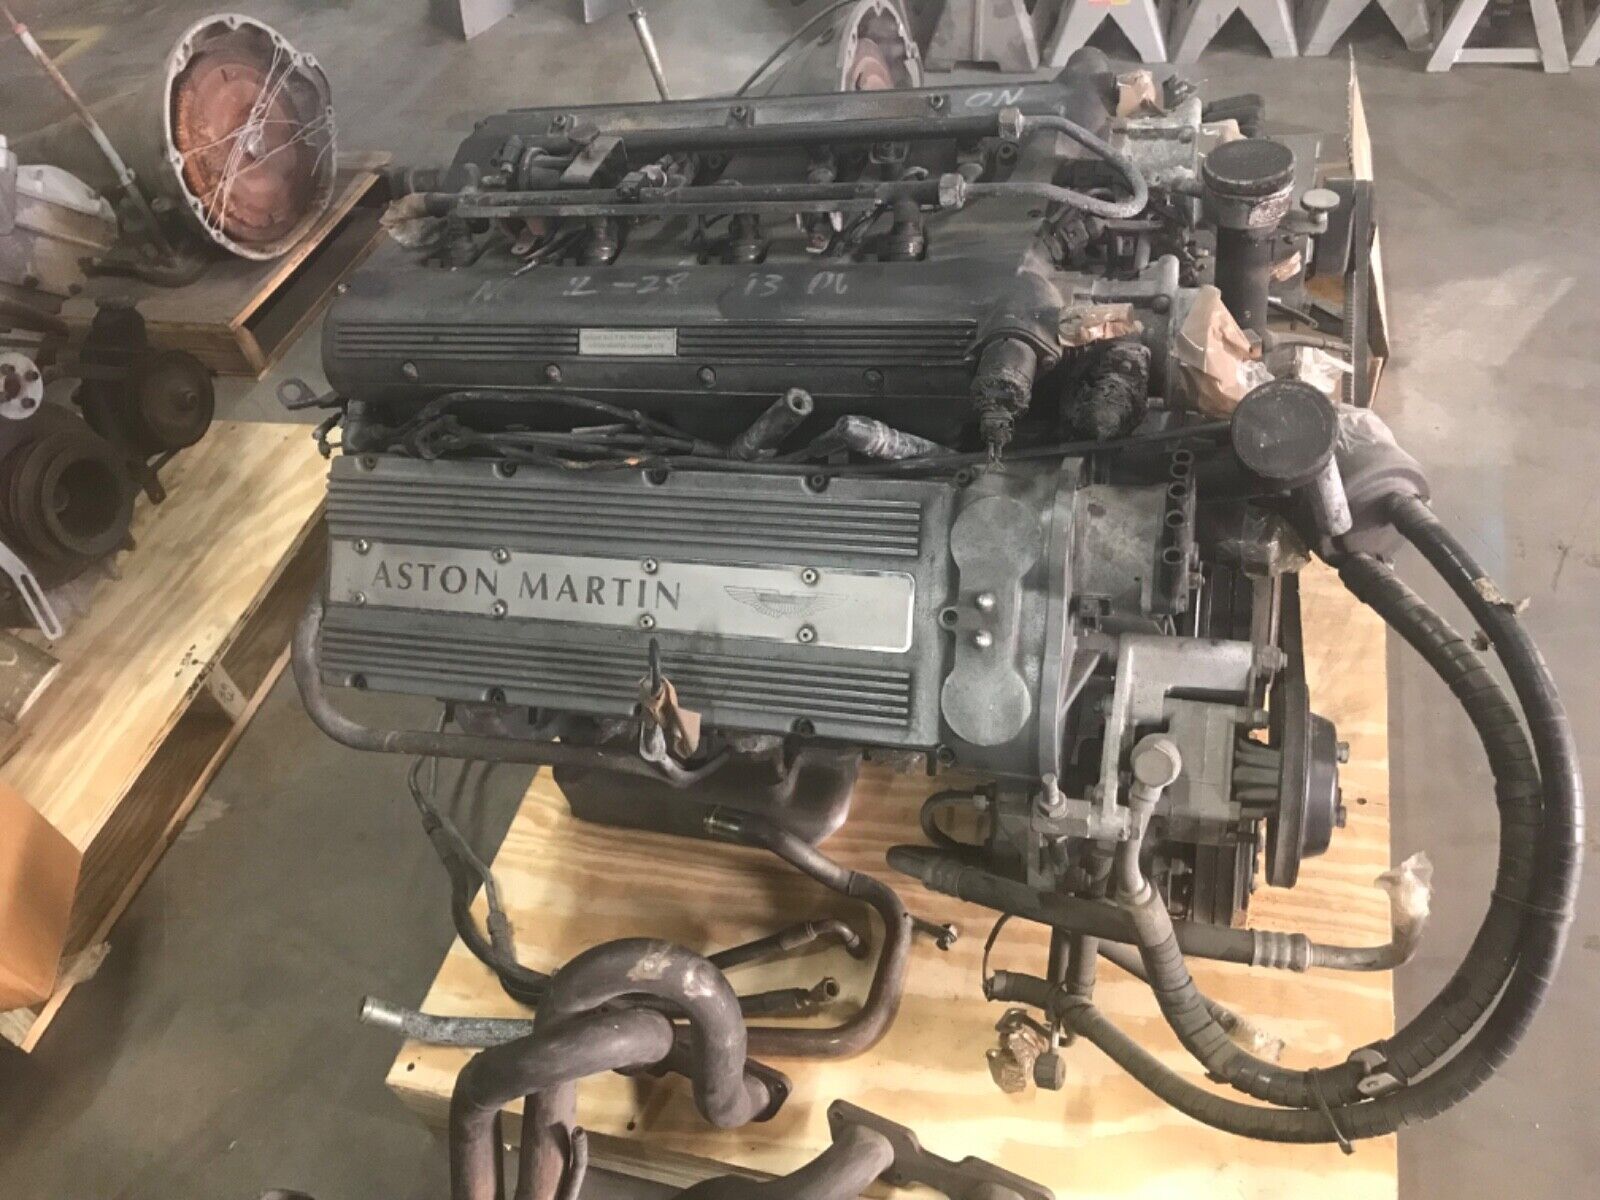 1997 Aston Martin 32 valve aluminum V8 with Stainless steel headers 1990 to 2000